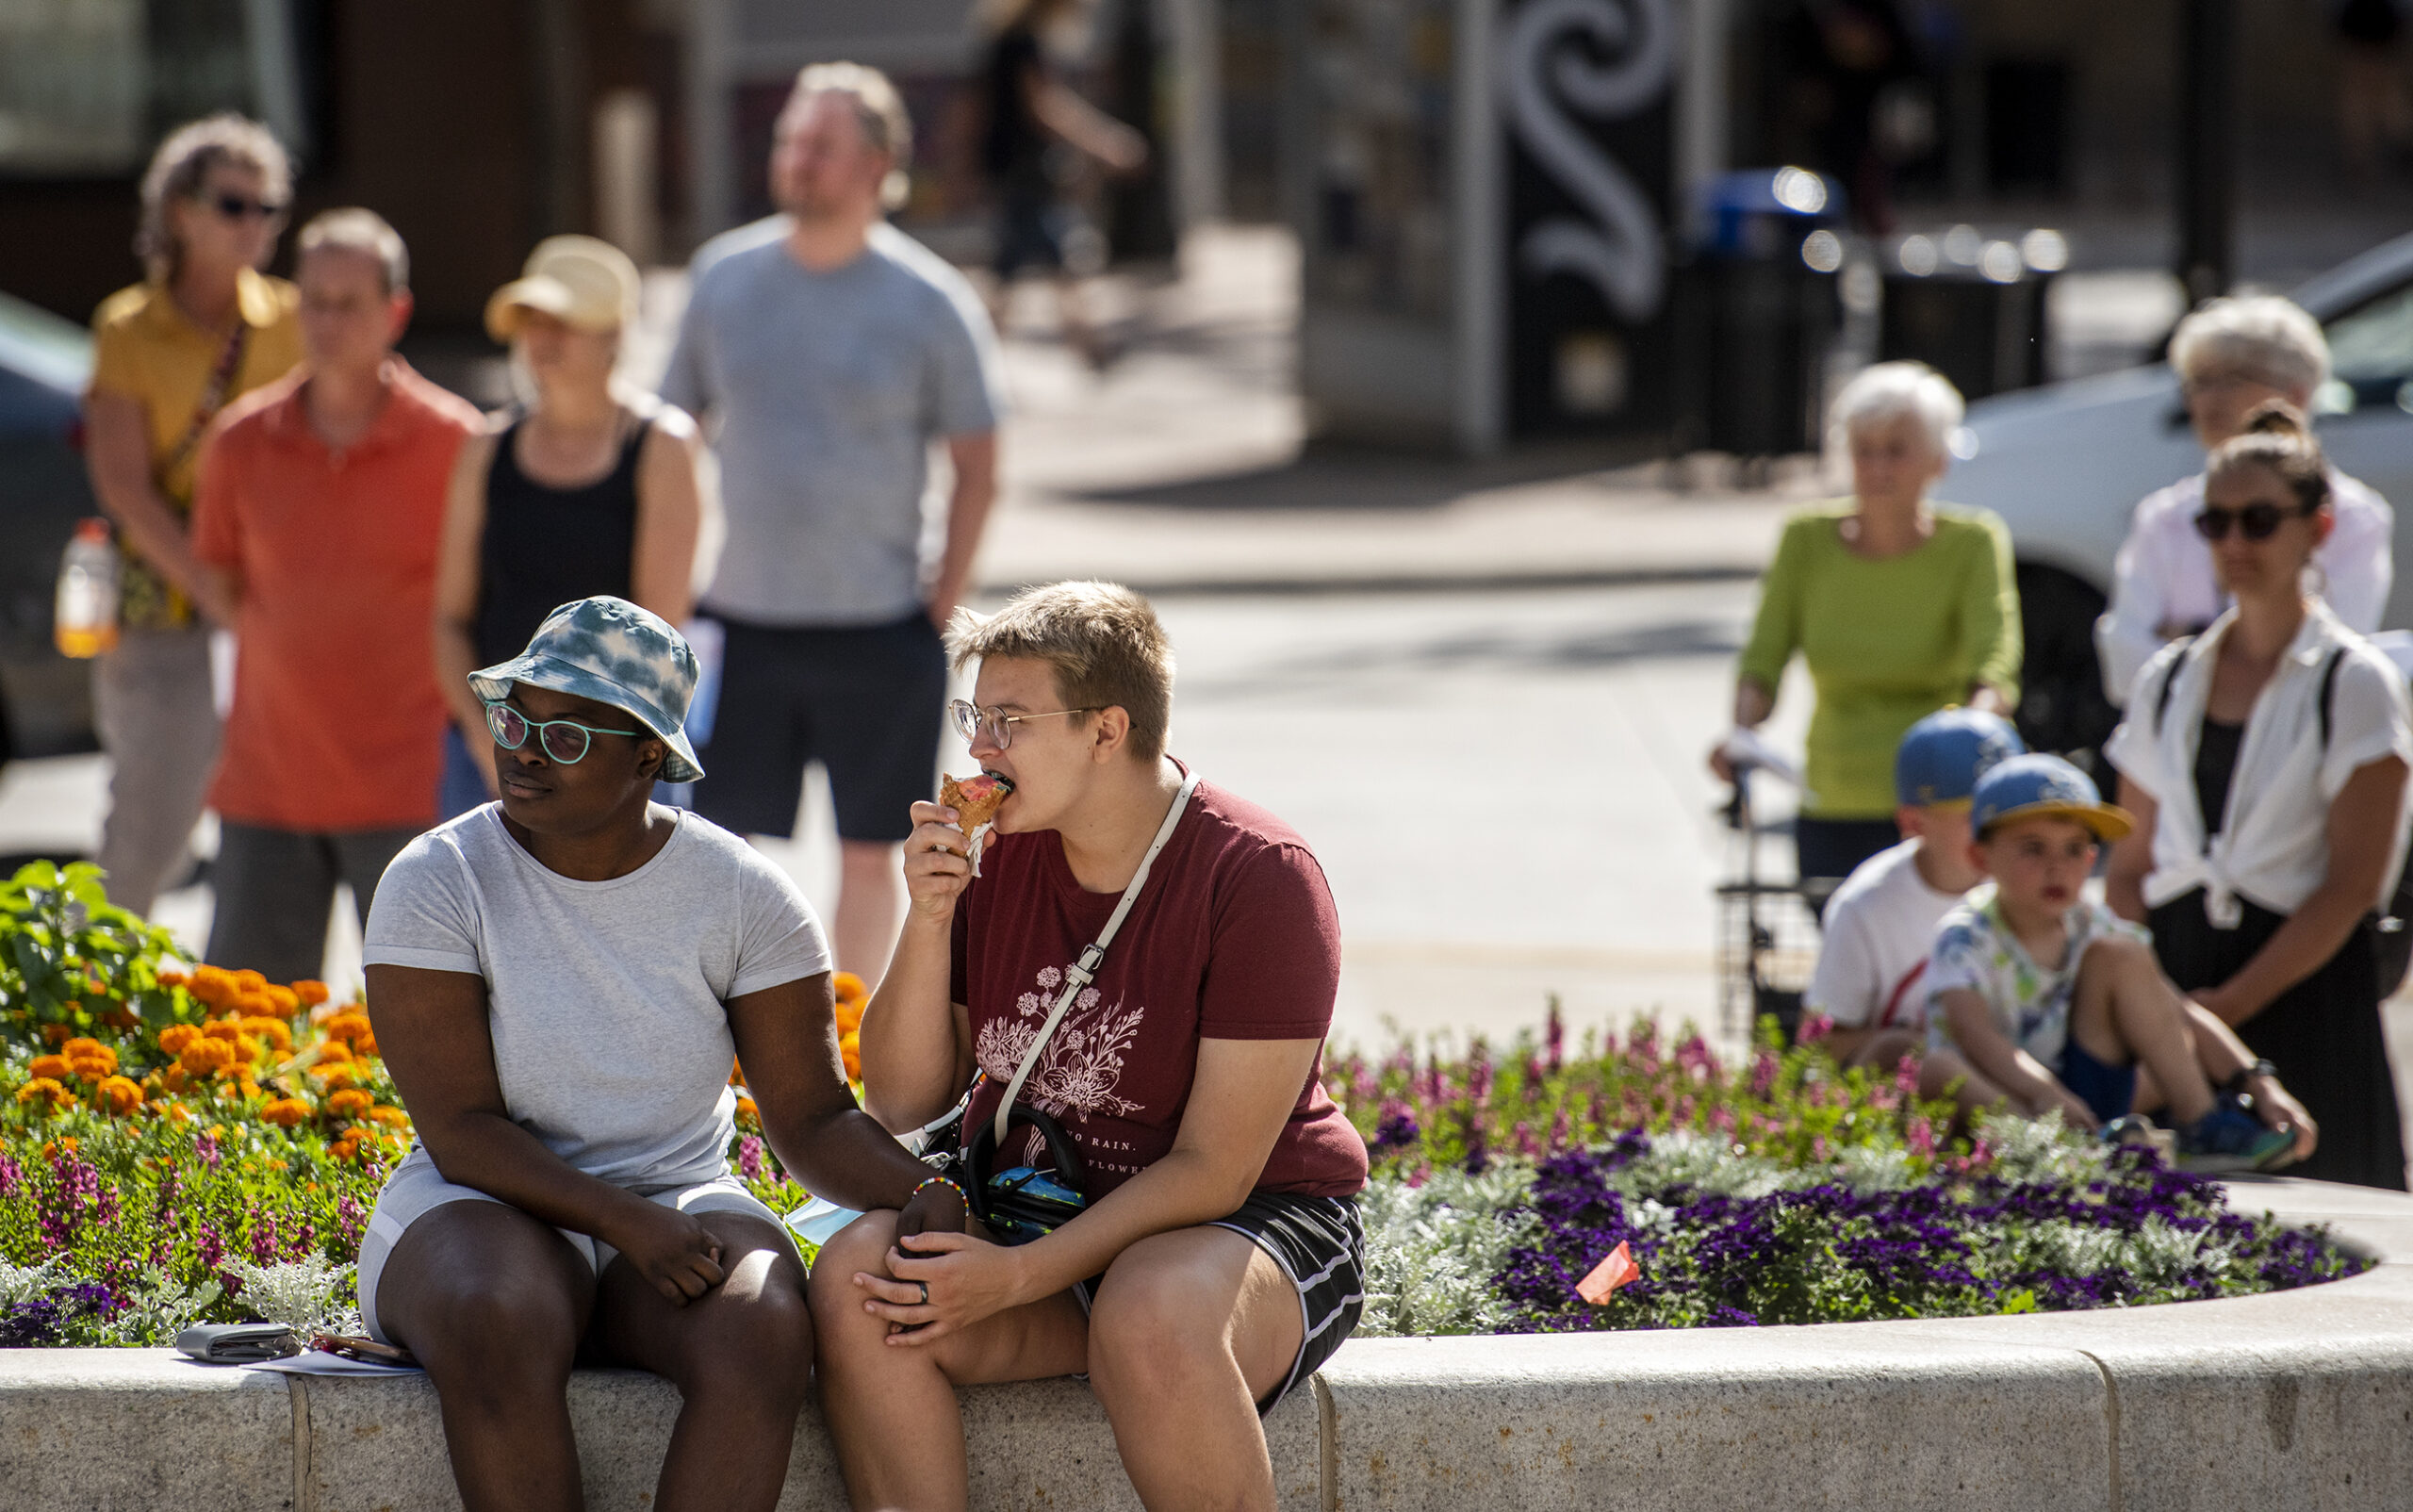 People sit and stand near flowers in on a sunny day in downtown Madison.